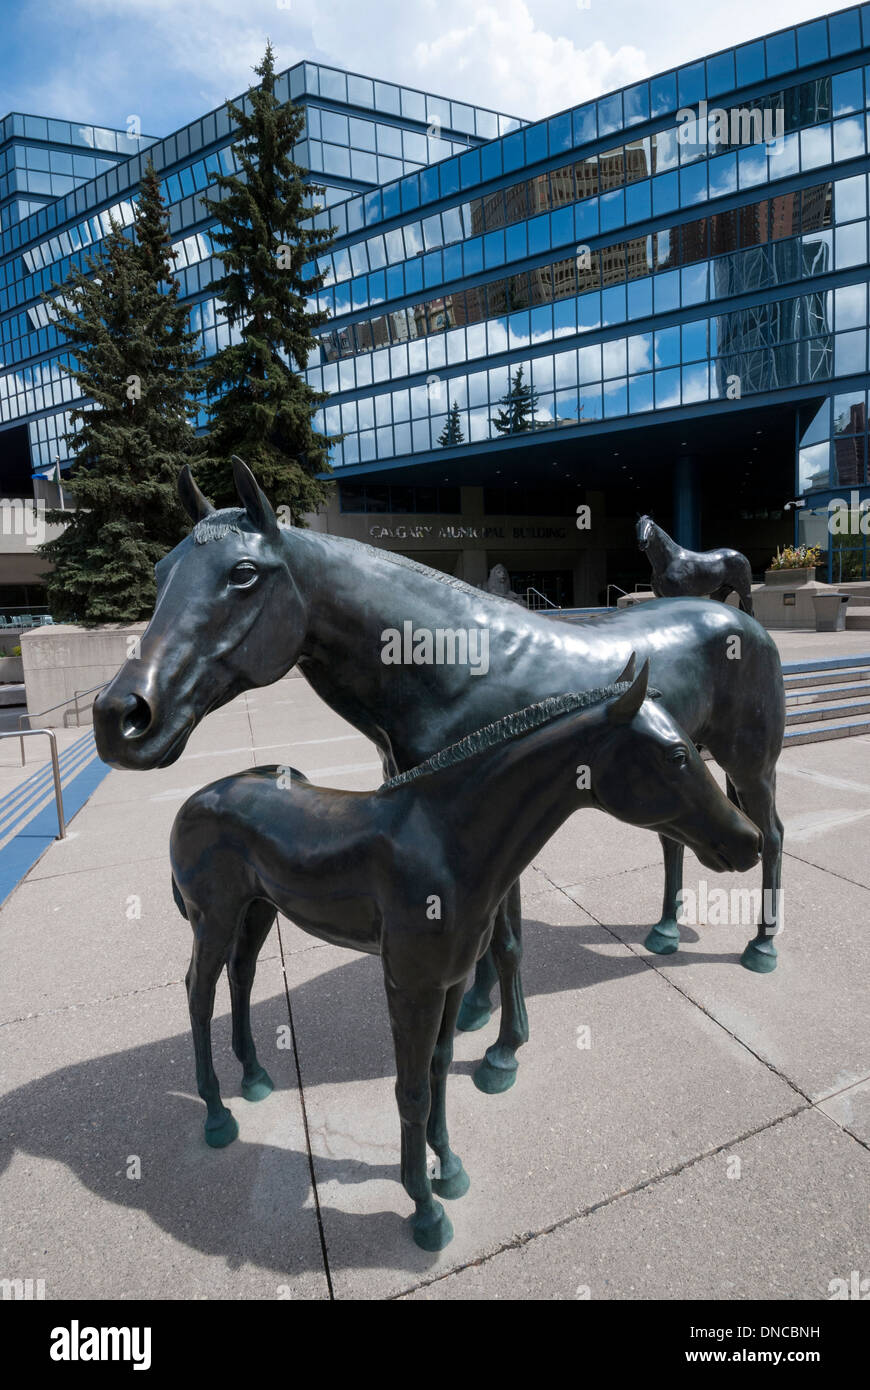 The horse sculpture on the terrace near the entrance to the new municipal building in the city of Calgary Alberta. Stock Photo